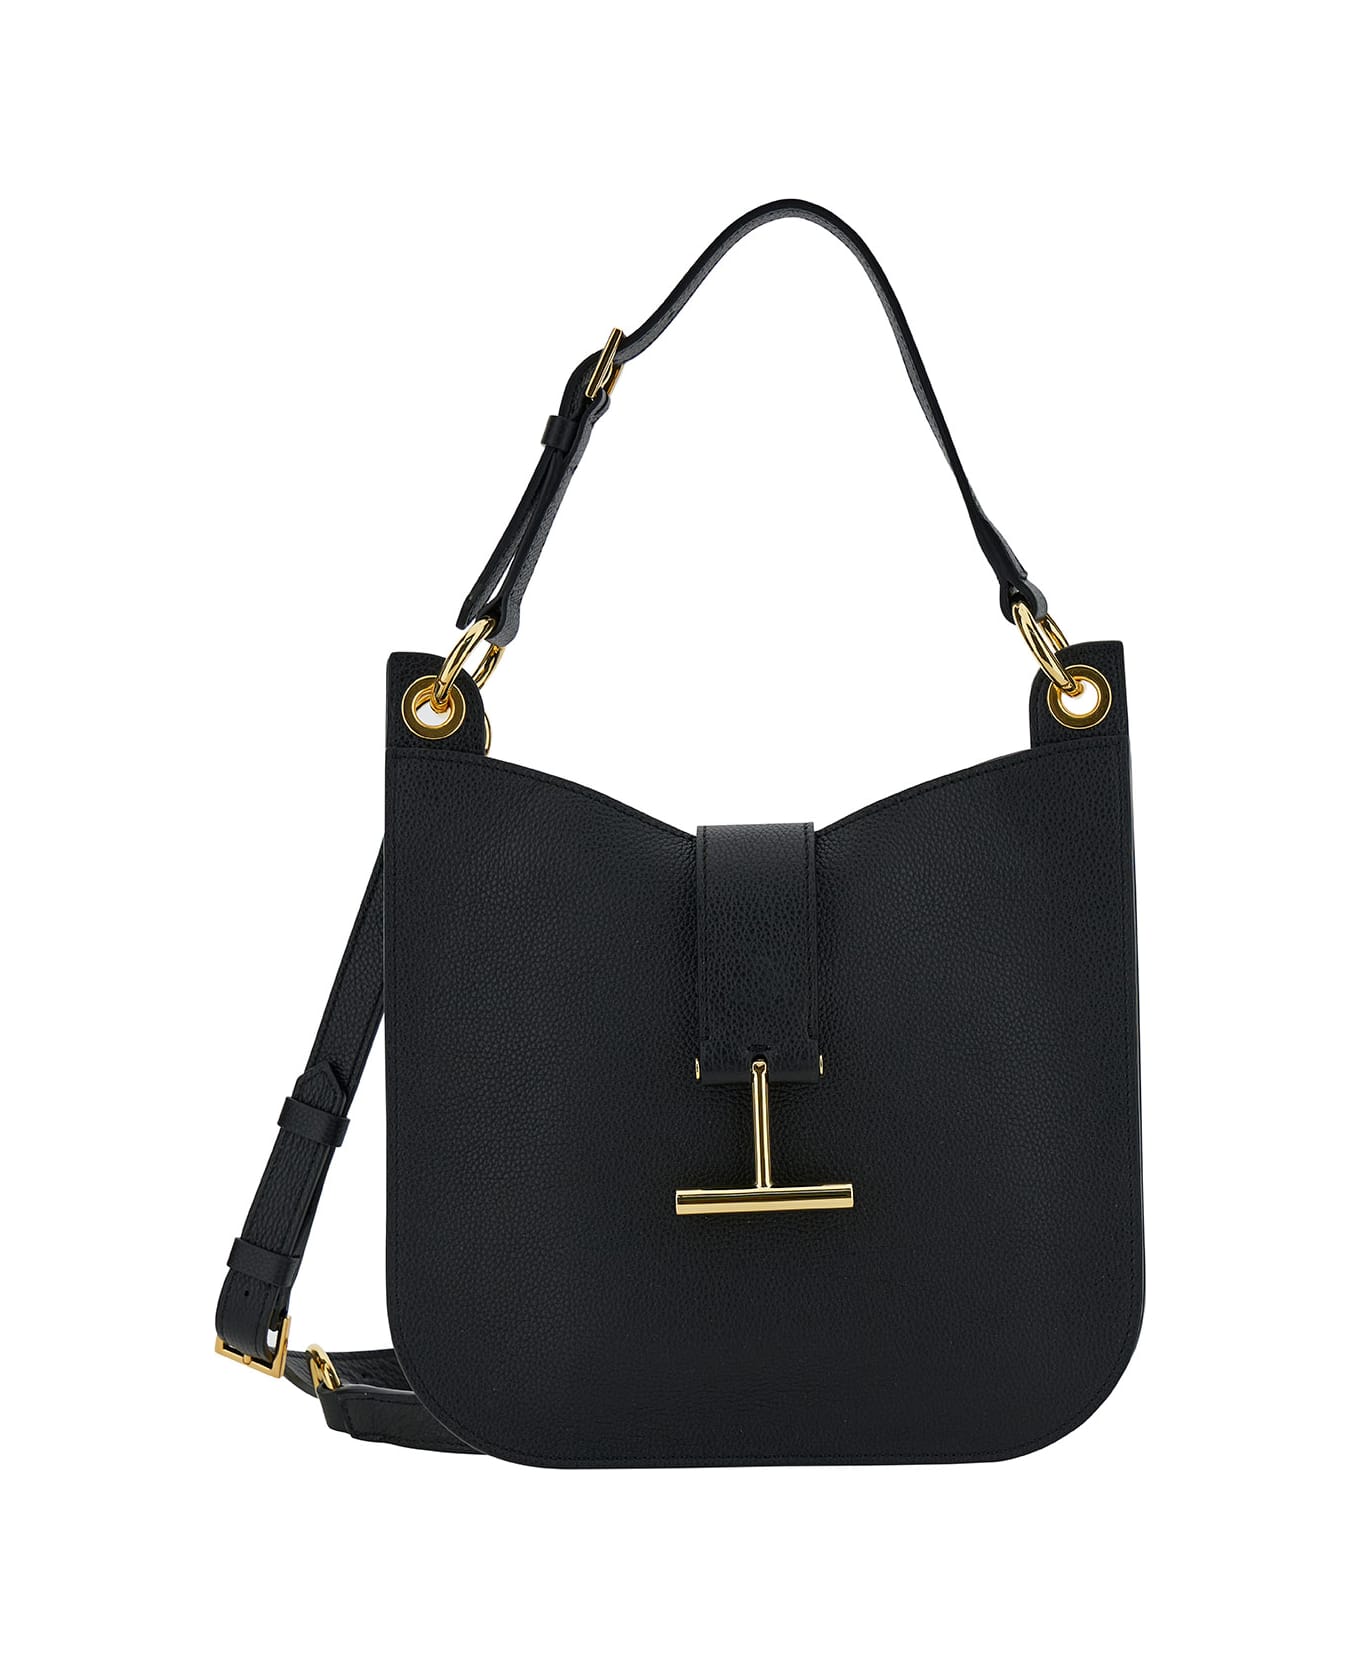 Tom Ford 'tara' Black Handbag With T Signature Detail In Grainy Leather Woman - Black トートバッグ